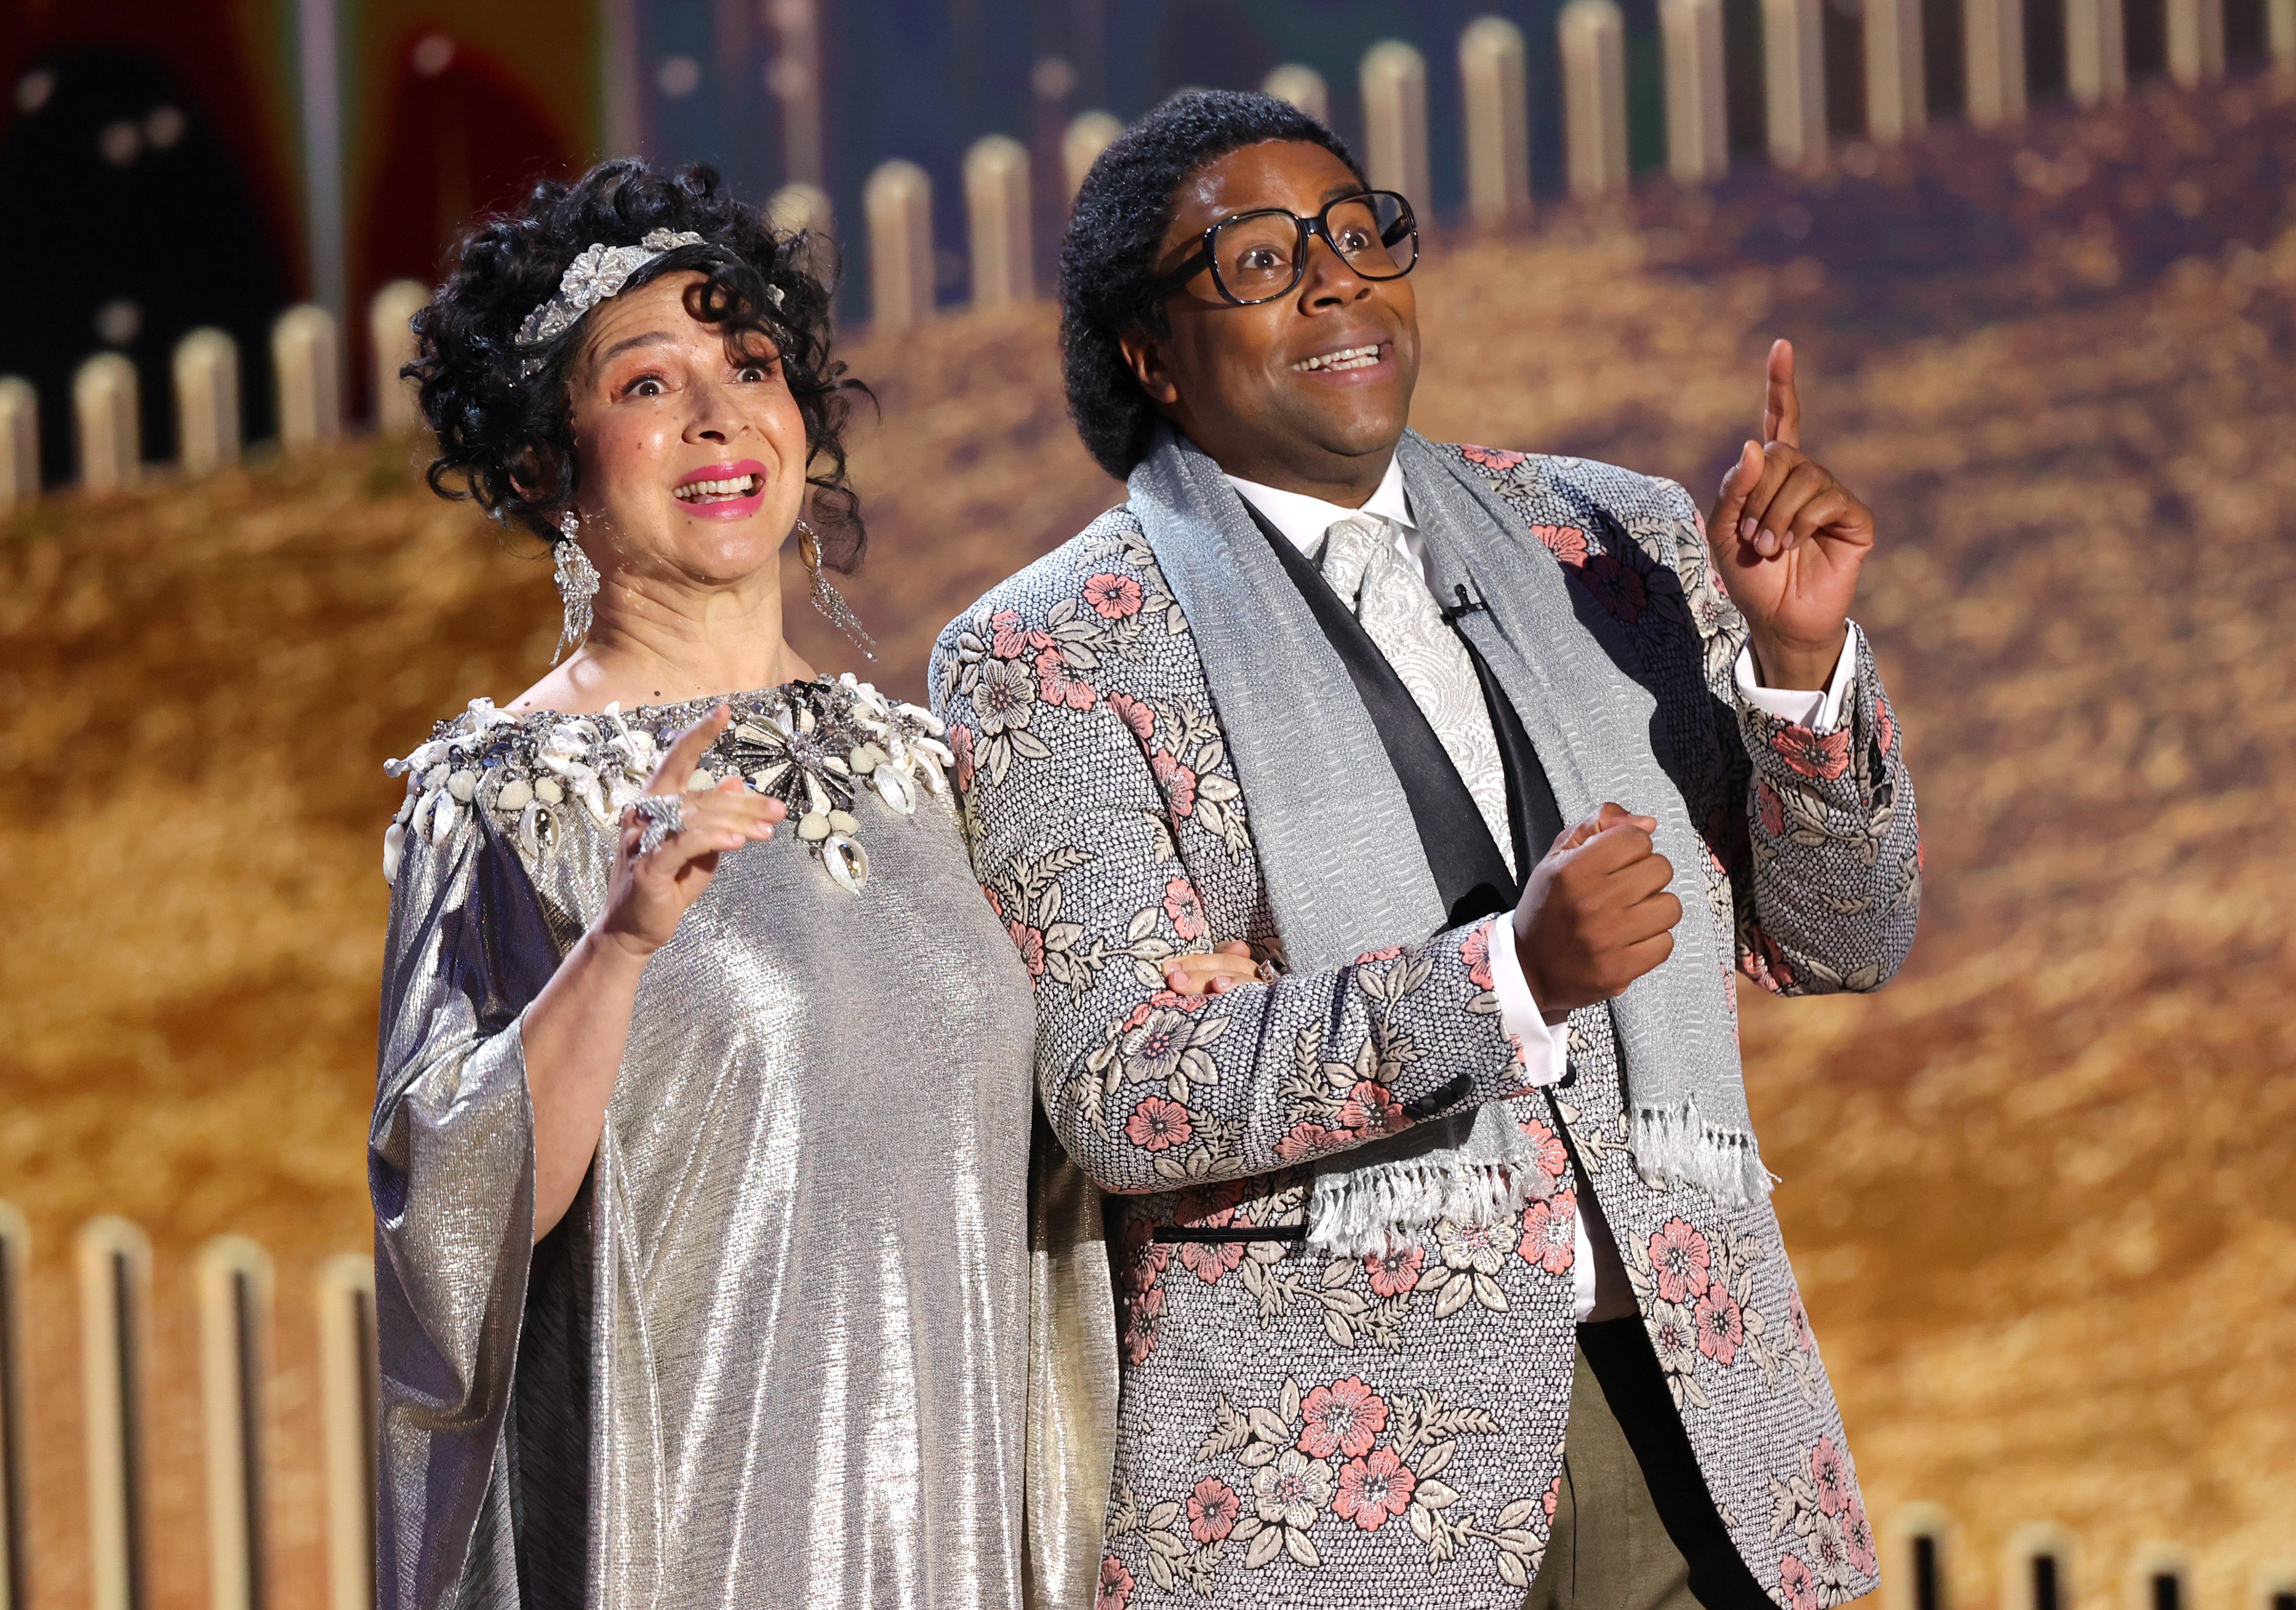 Maya Rudolph and Kenan Thompson perform a skit onstage at the 78th Annual Golden Globe Awards (NBCU Photo Bank via Getty Images—2021 Rich Polk/NBCUniversal)